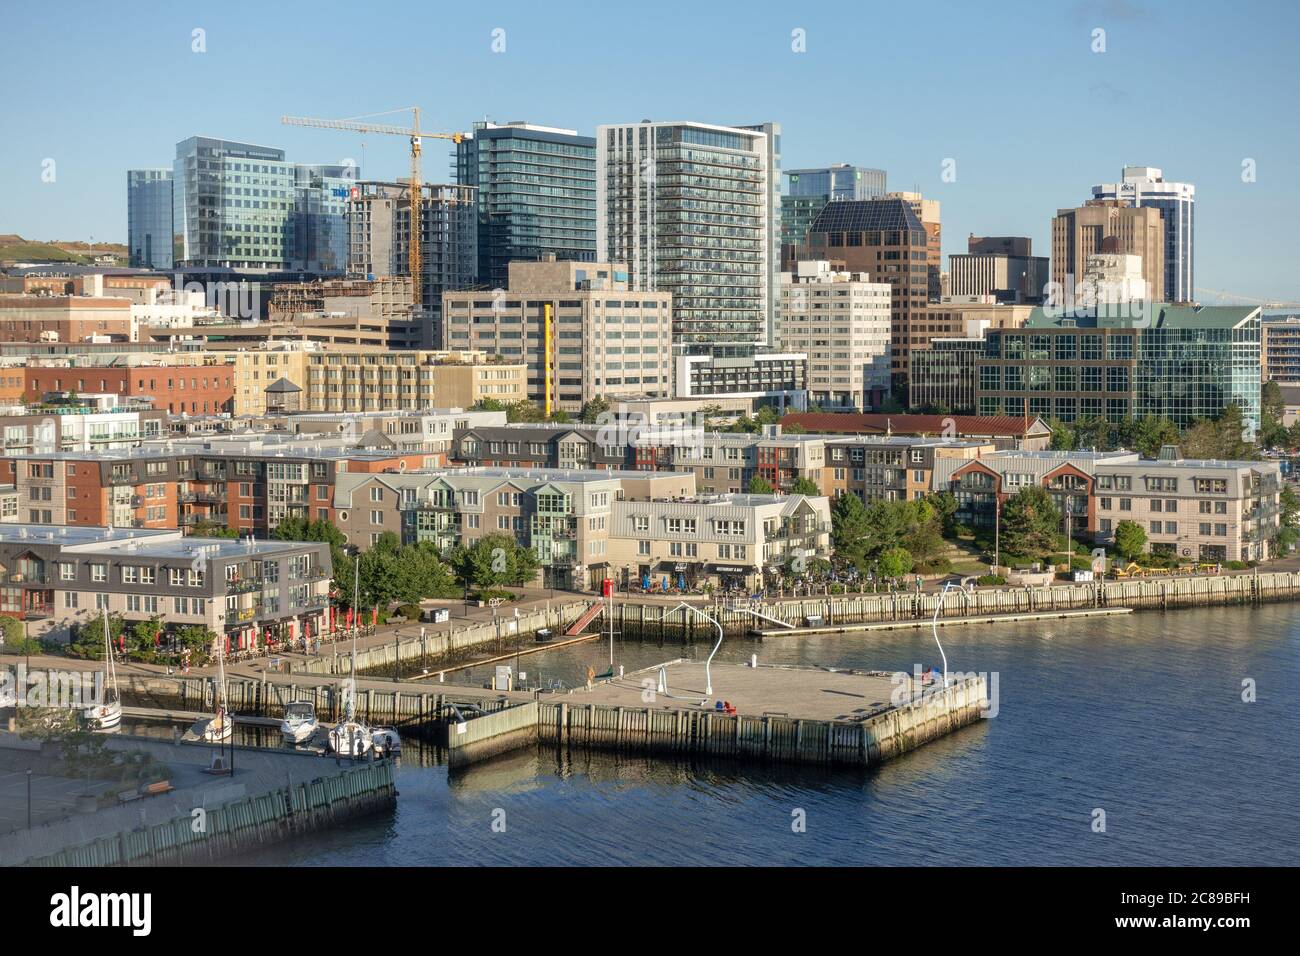 Early Morning Halifax Nova Scotia, Canada City Centre Skyscrapers Downtown  Waterfront Boardwalk Canadian Port Halifax harbour Stock Photo